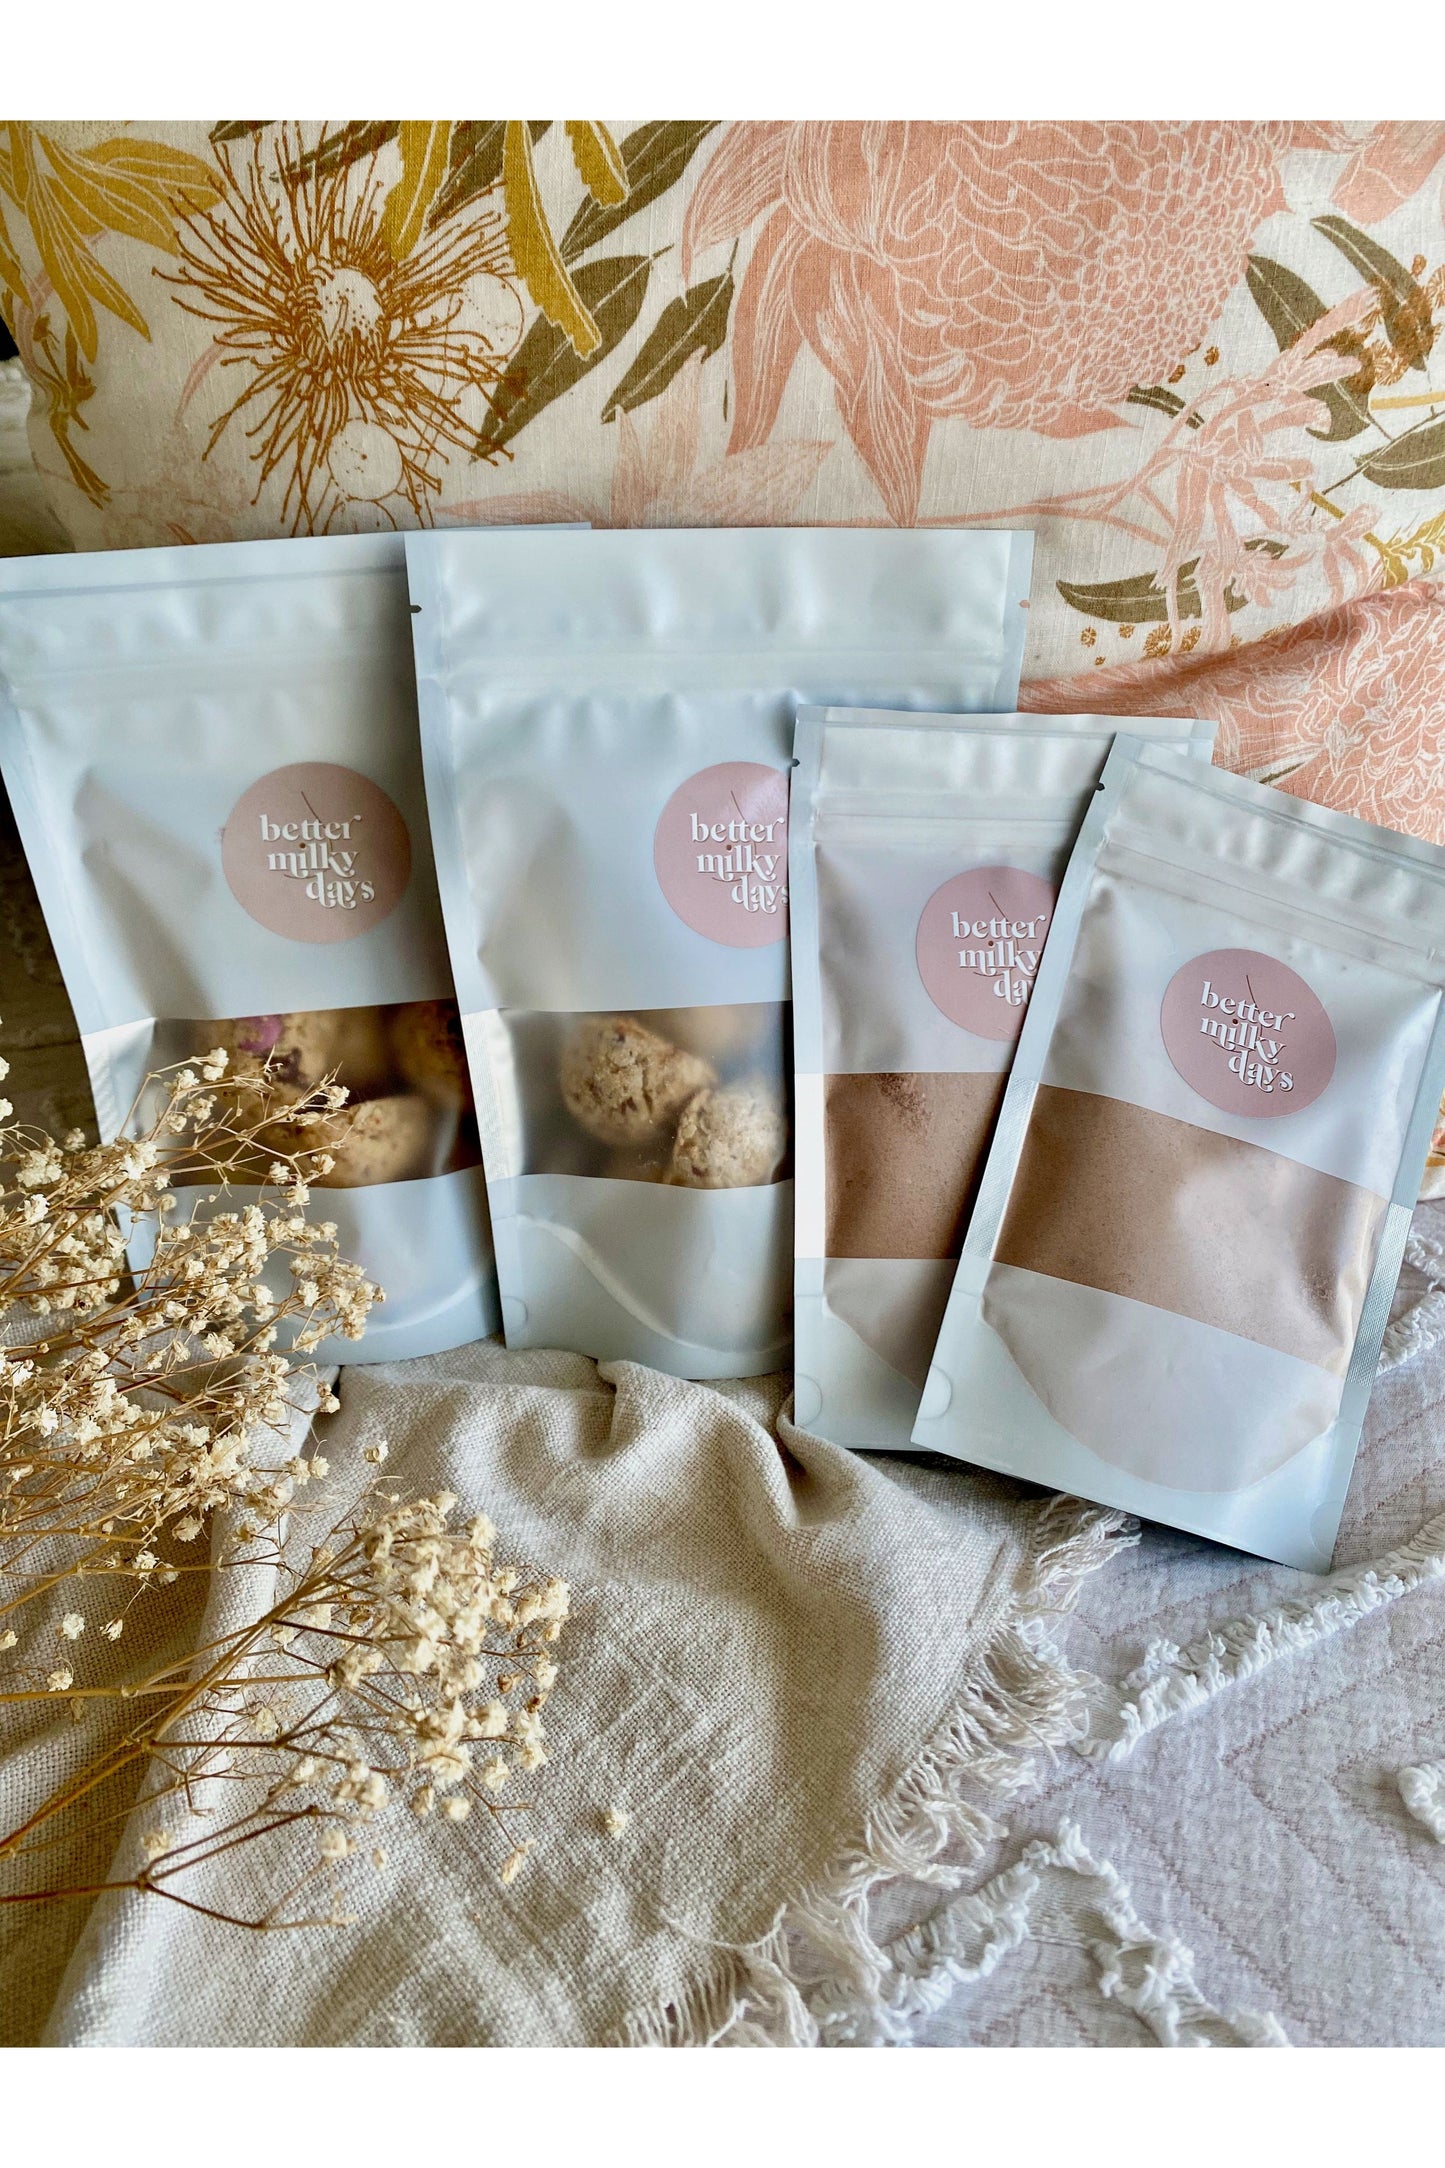 easy gift for a new mum, bundle deal lactation cookies